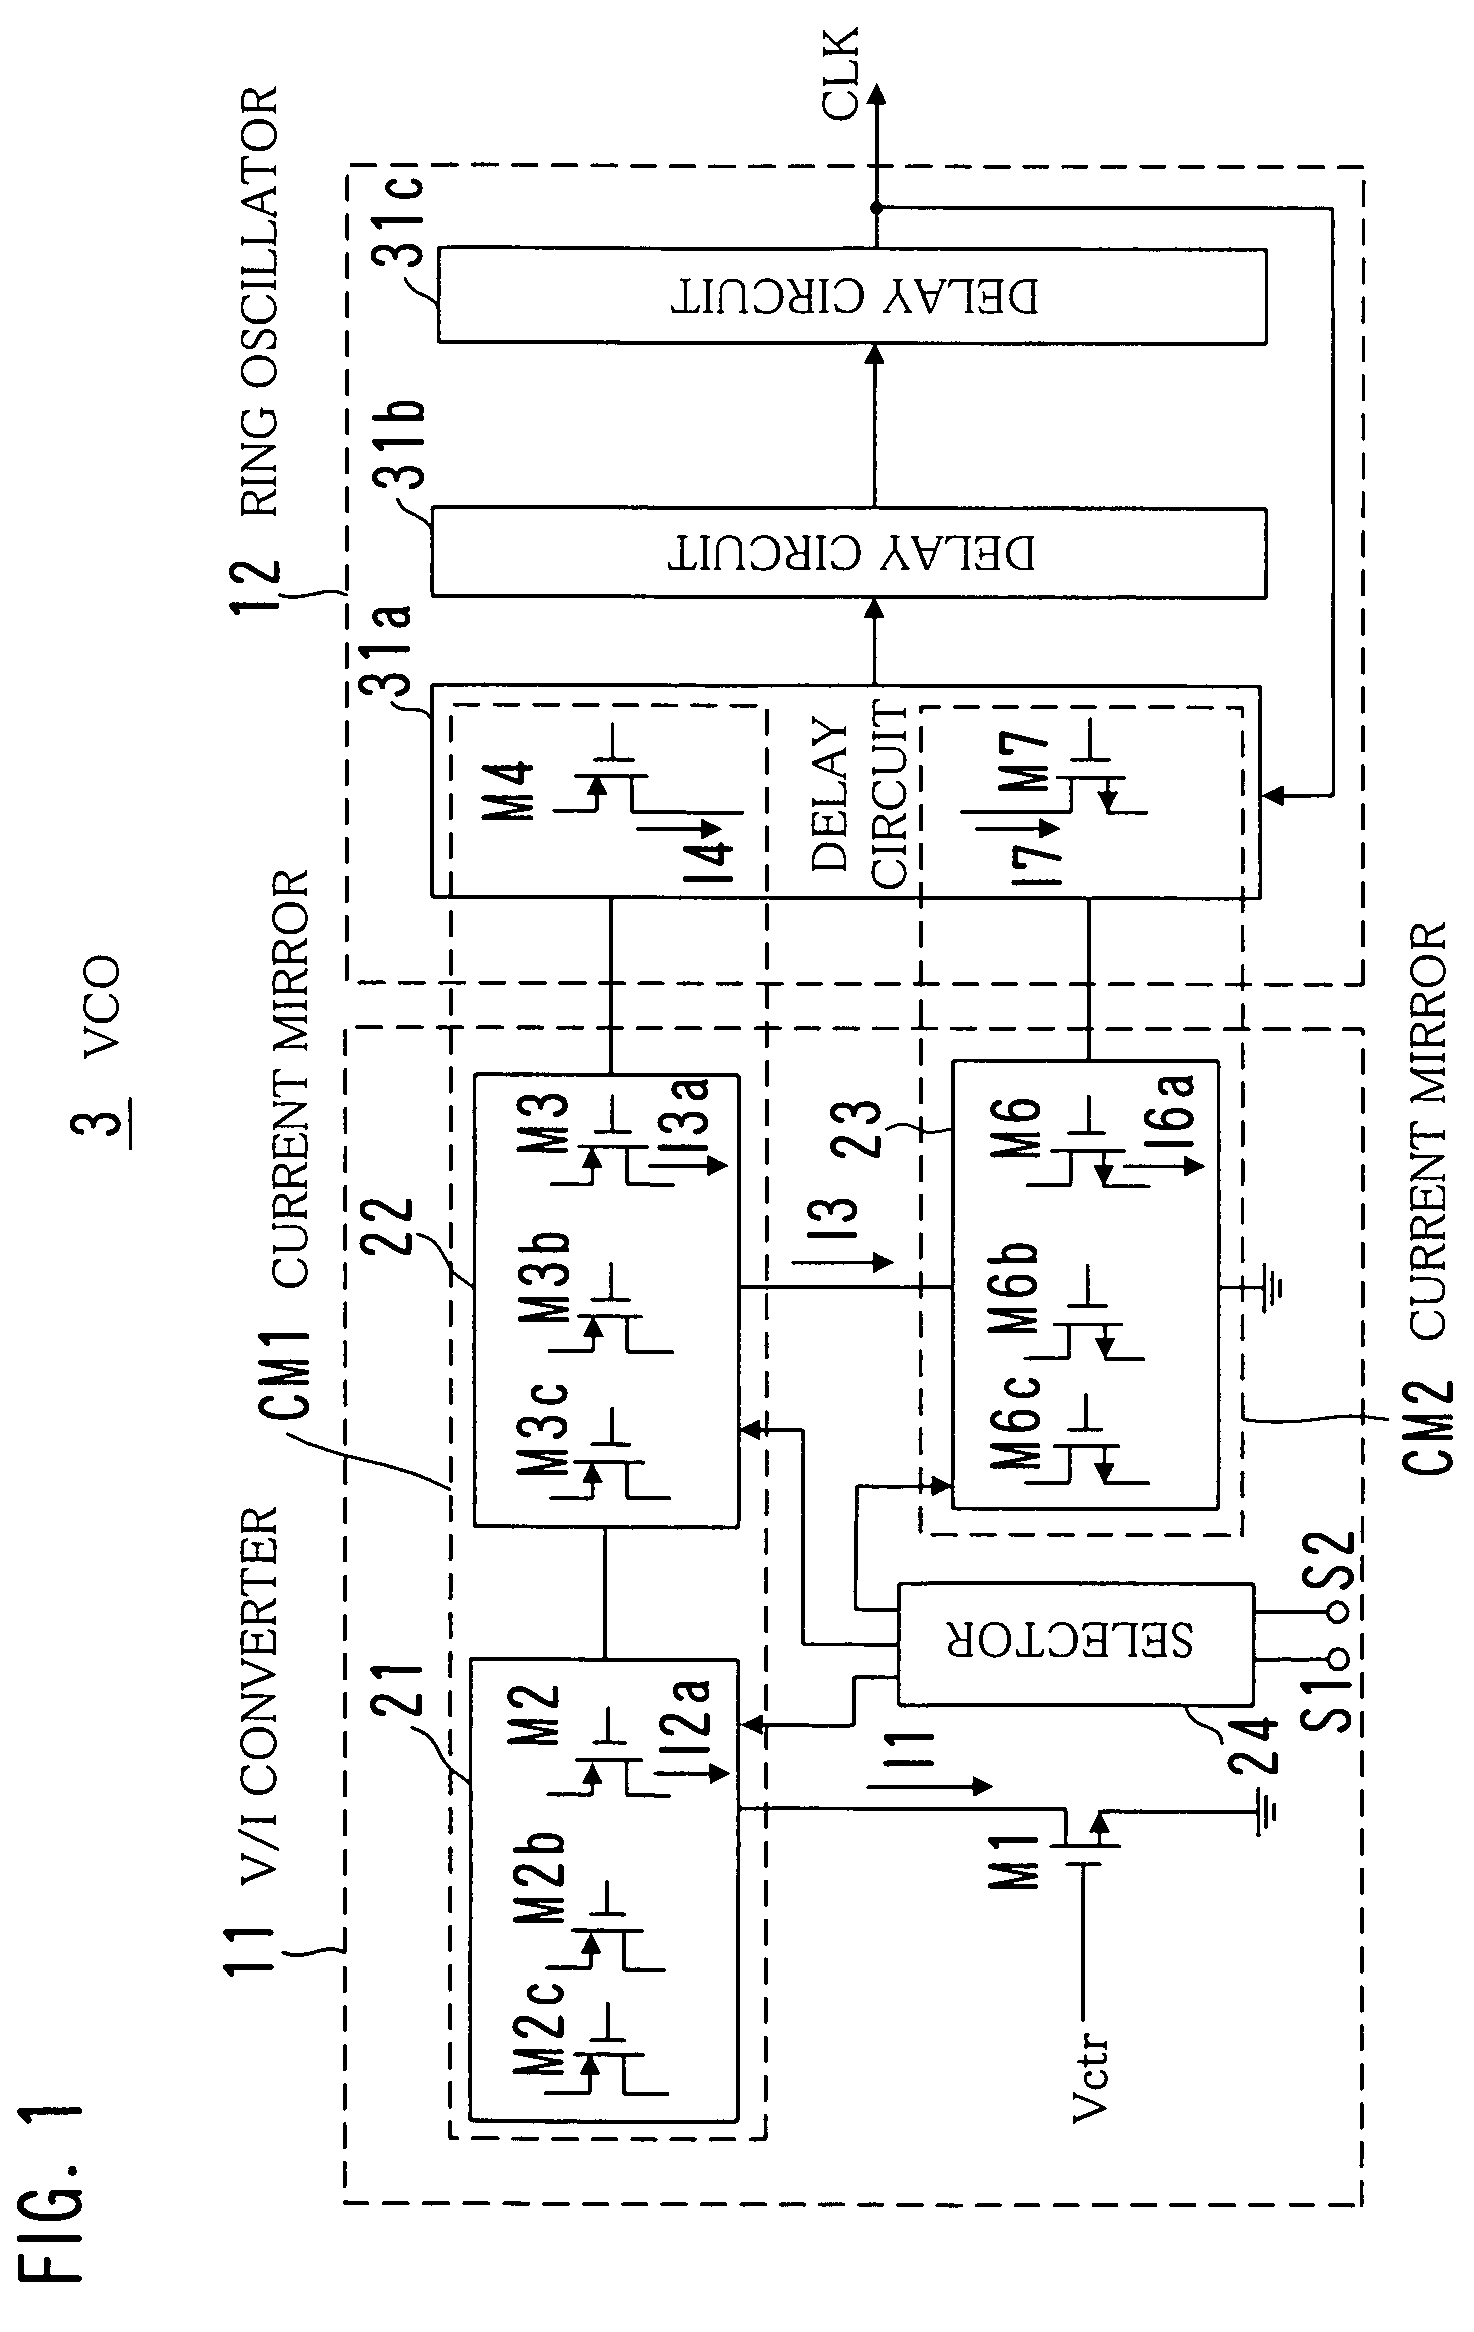 Voltage controlled oscillator circuit with different sized shunt transistors